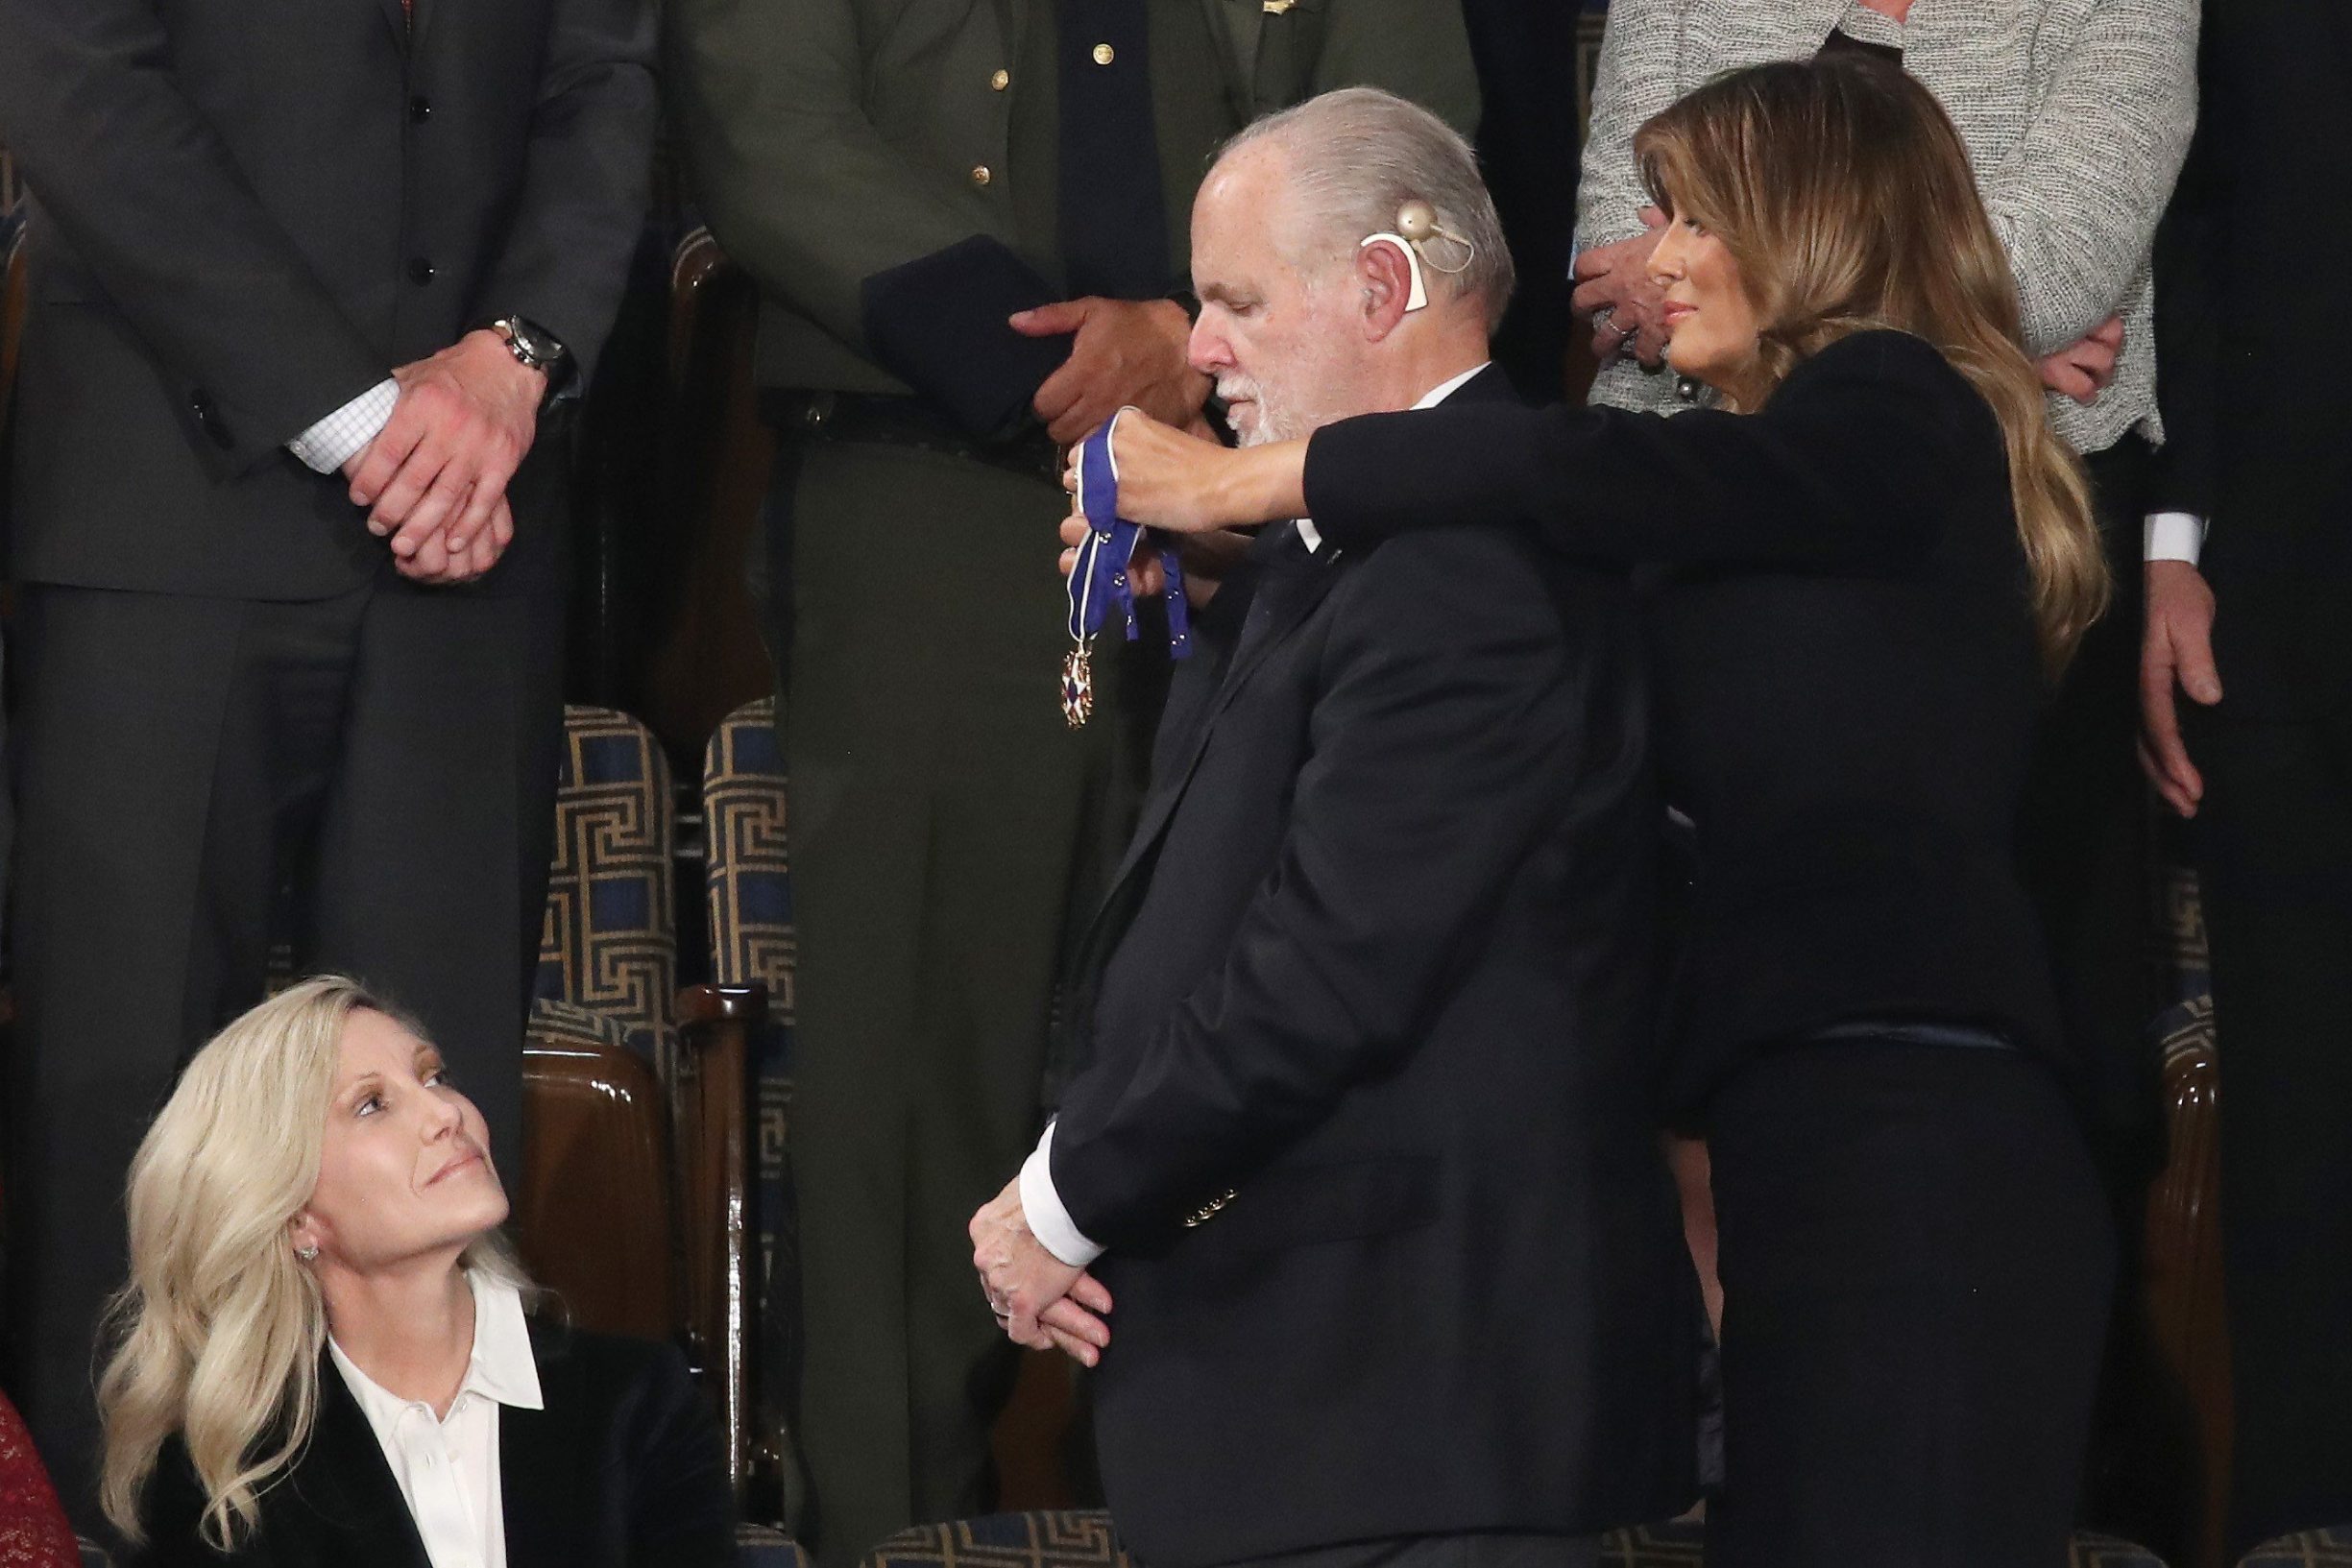 WASHINGTON, DC - FEBRUARY 04: Radio personality Rush Limbaugh reacts after First Lady Melania Trump gives him the Presidential Medal of Freedom during the State of the Union address in the chamber of the U.S. House of Representatives on February 04, 2020 in Washington, DC. President Trump delivers his third State of the Union to the nation the night before the U.S. Senate is set to vote in his impeachment trial.   Drew Angerer/Getty Images/AFP
== FOR NEWSPAPERS, INTERNET, TELCOS & TELEVISION USE ONLY ==